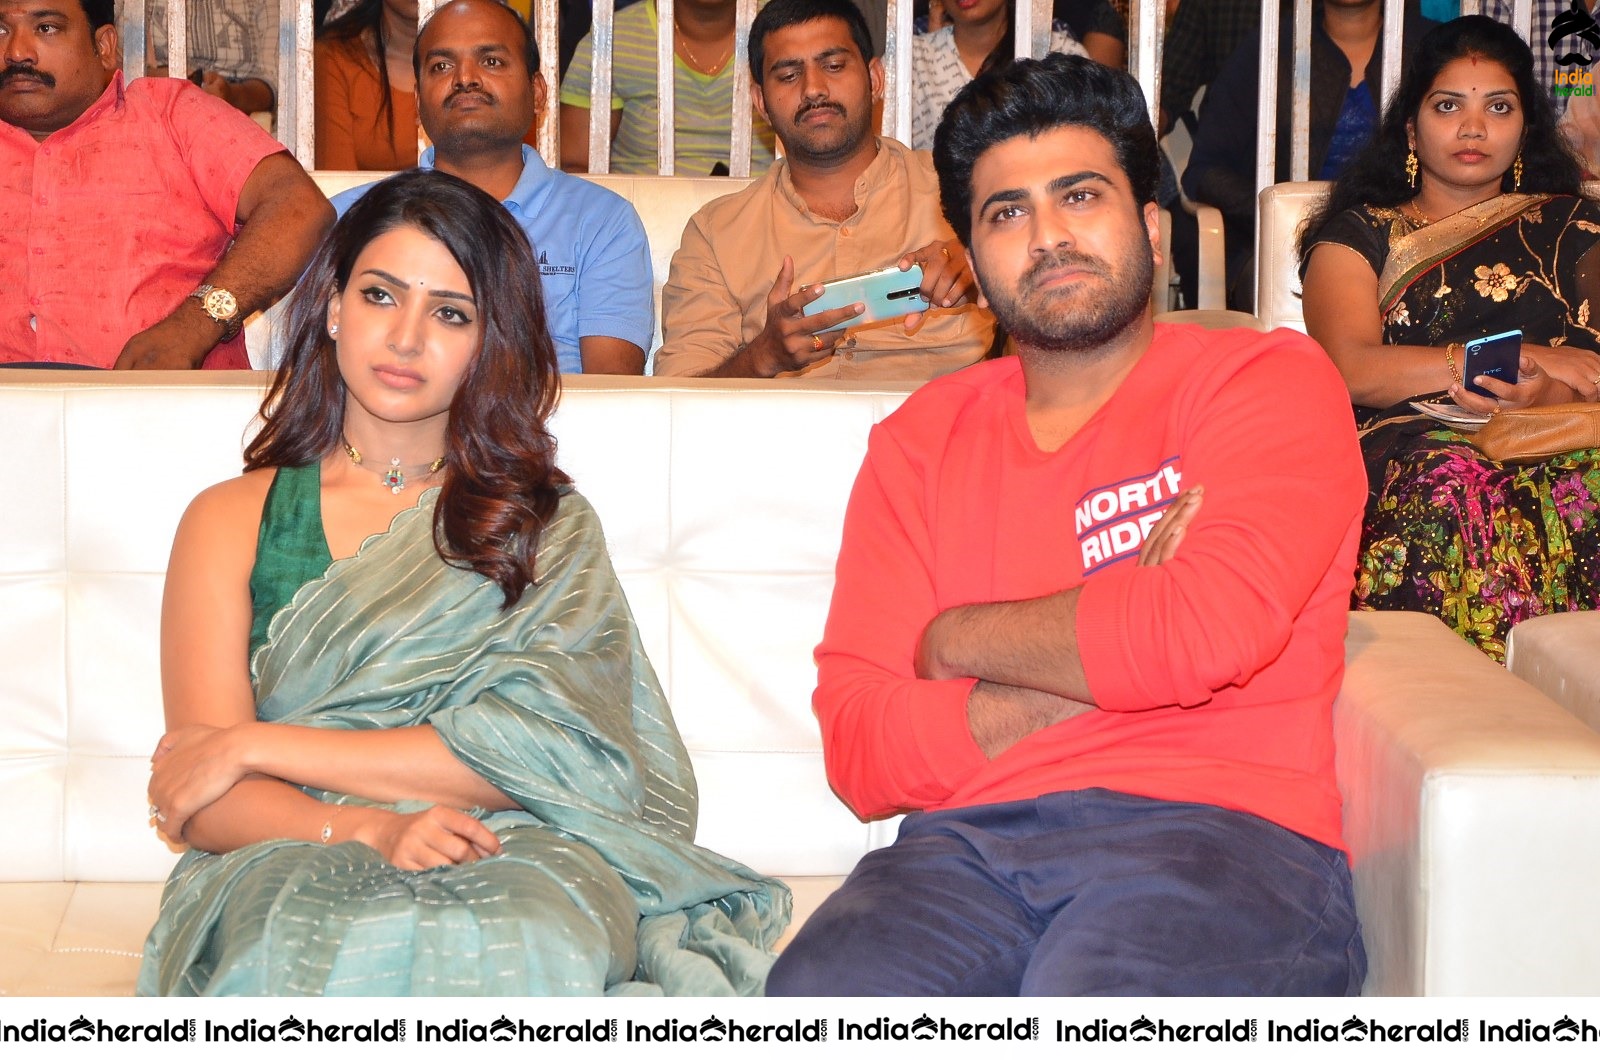 Actor Sharwanand share a hearty laughter with Samantha Akkineni